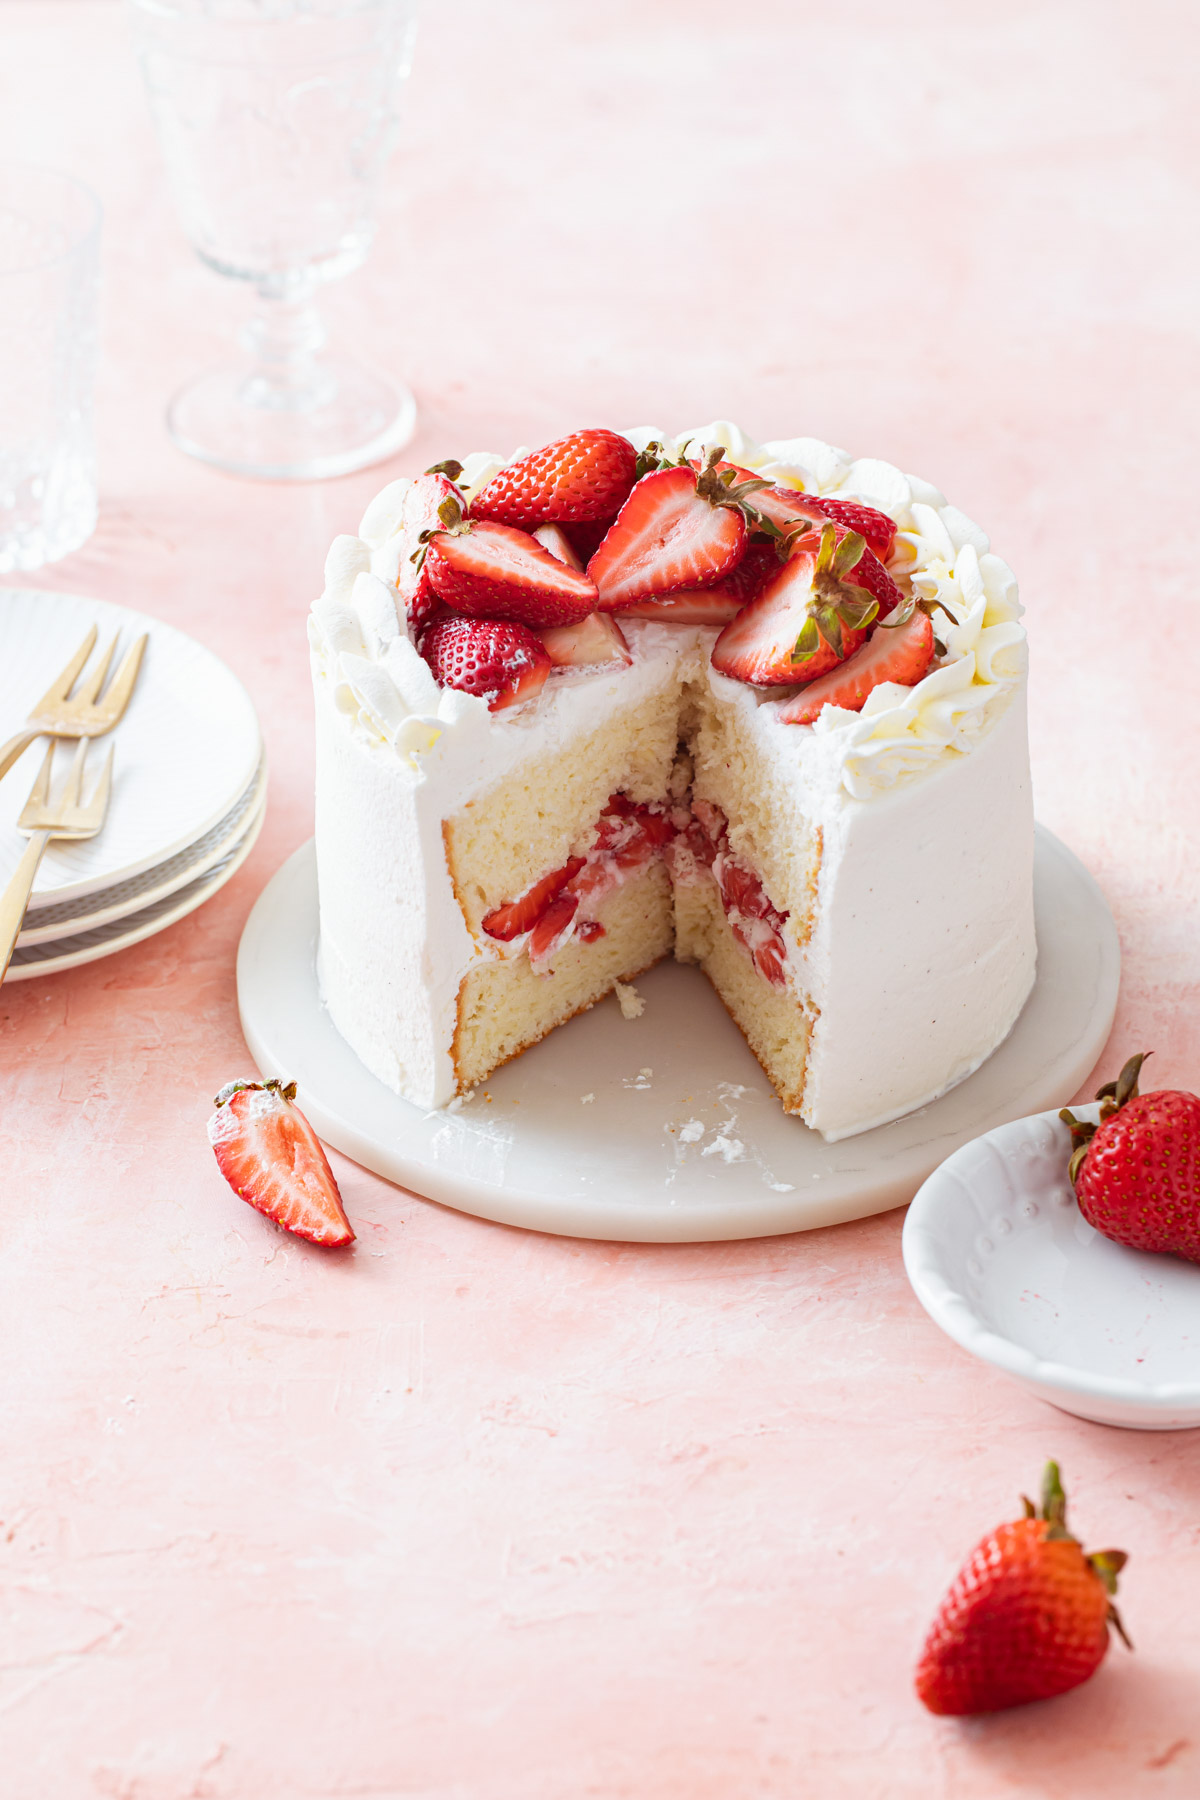 A mini two layer chiffon cake with strawberry filling and whipped cream frosting